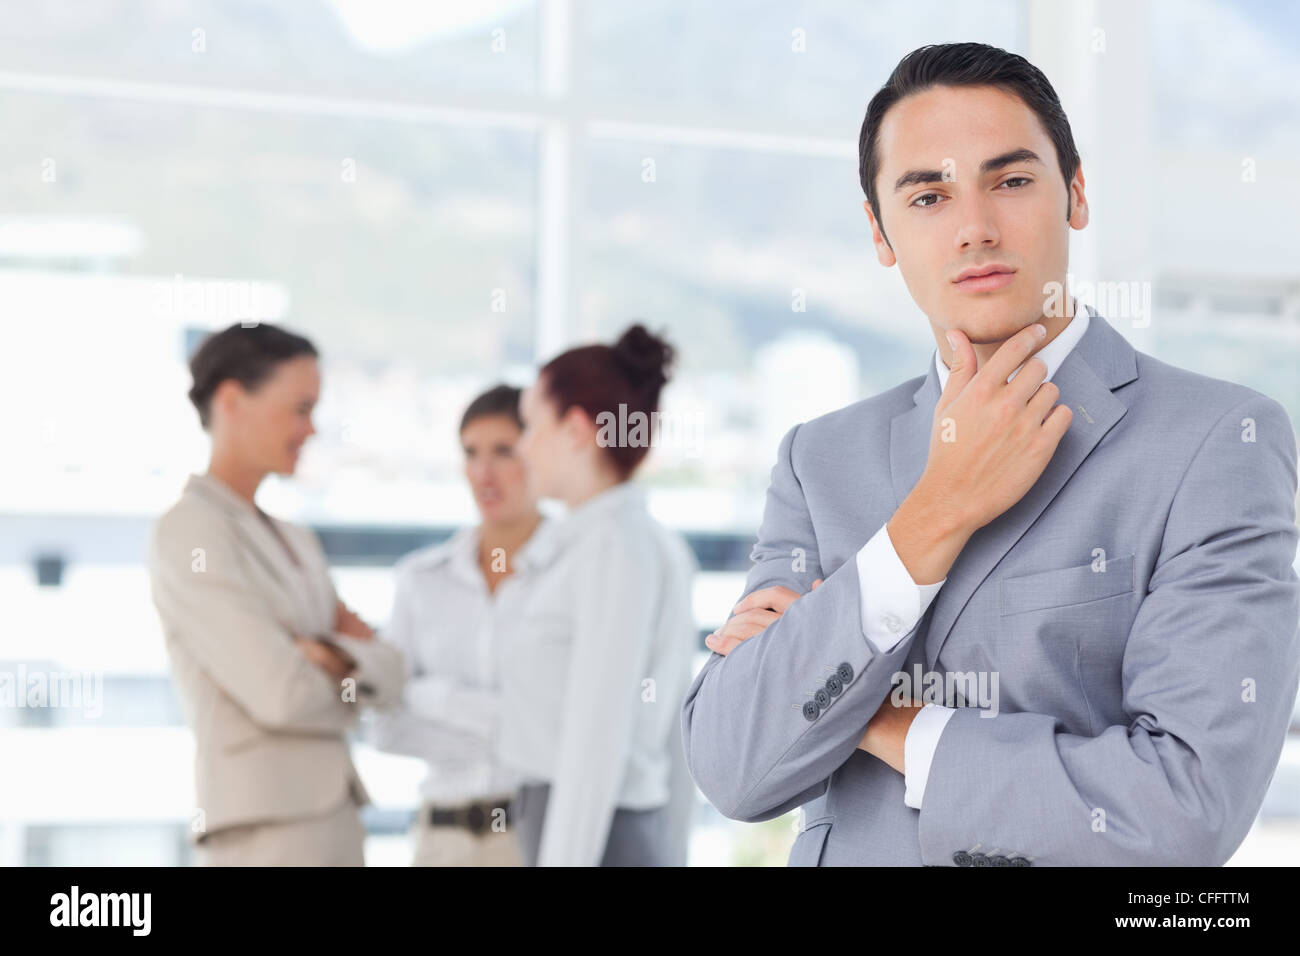 Businessman in thinkers pose and colleagues behind him Stock Photo